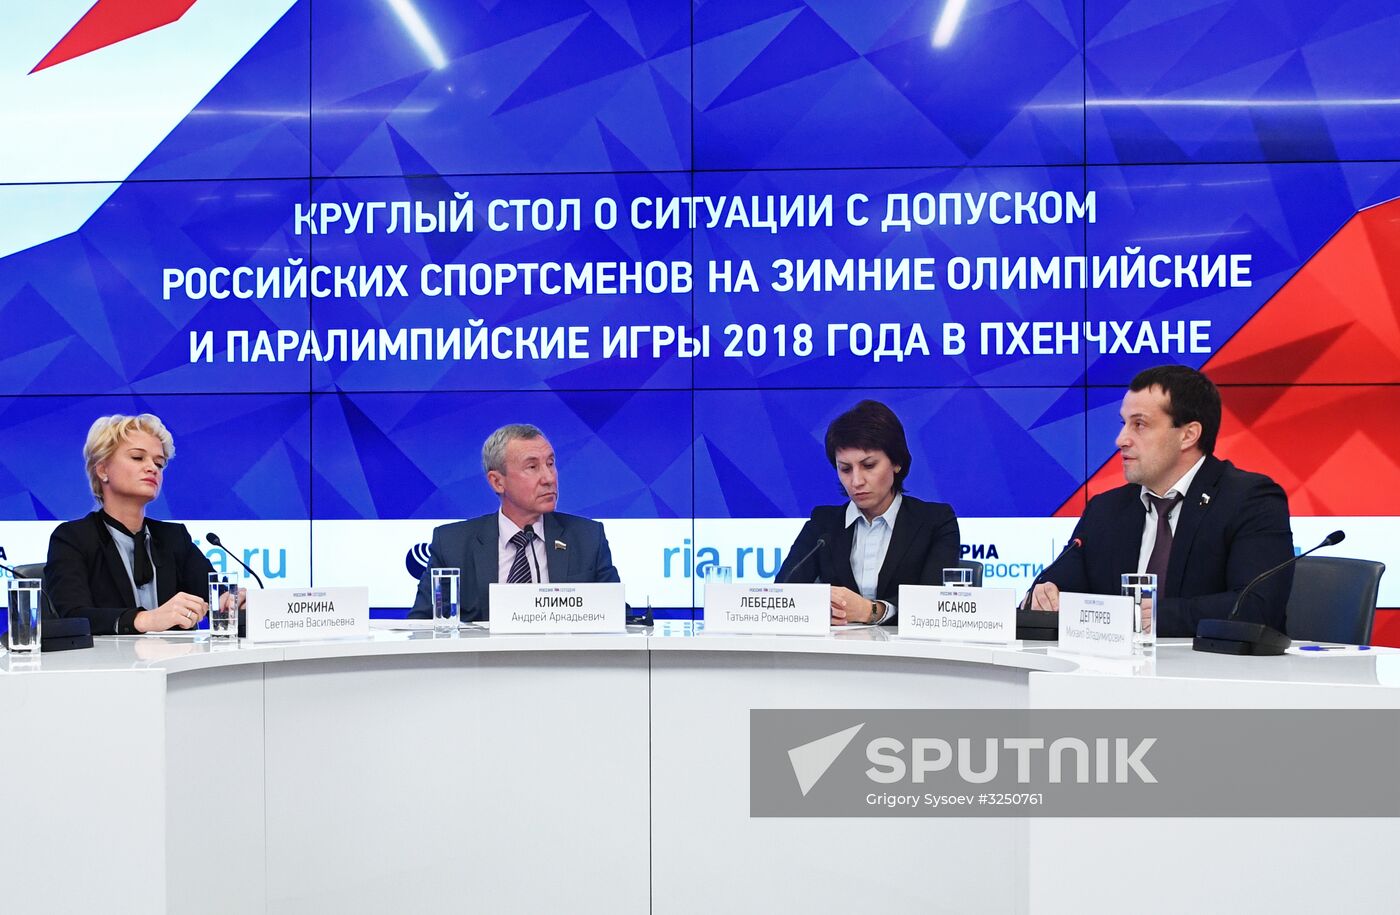 Roundtable meeting on Russia's participation in Olympic Games